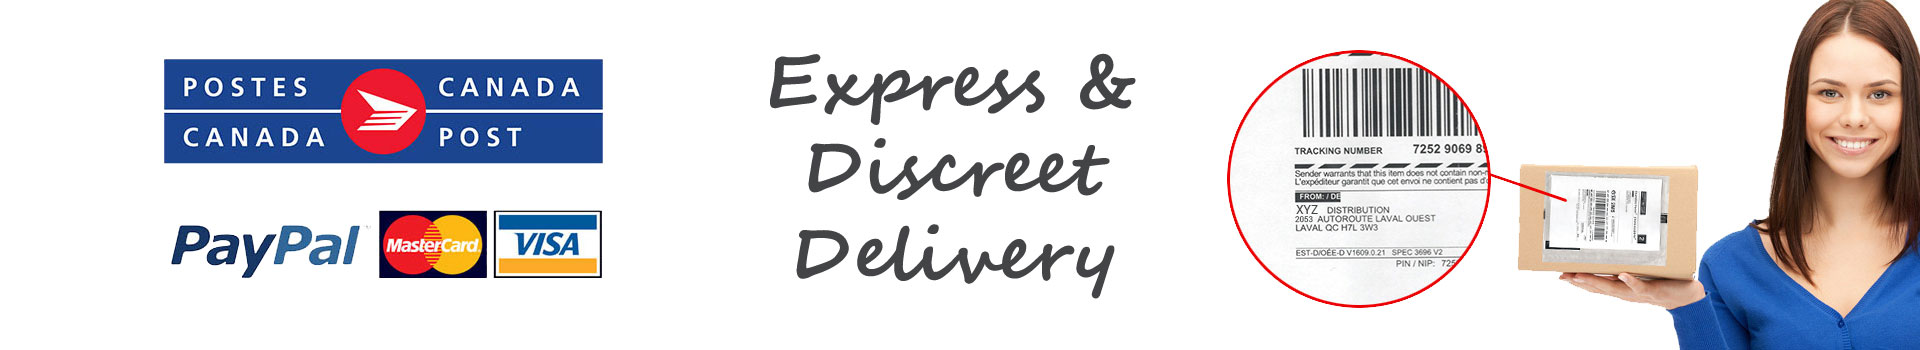 Discreet delivery Secured payments